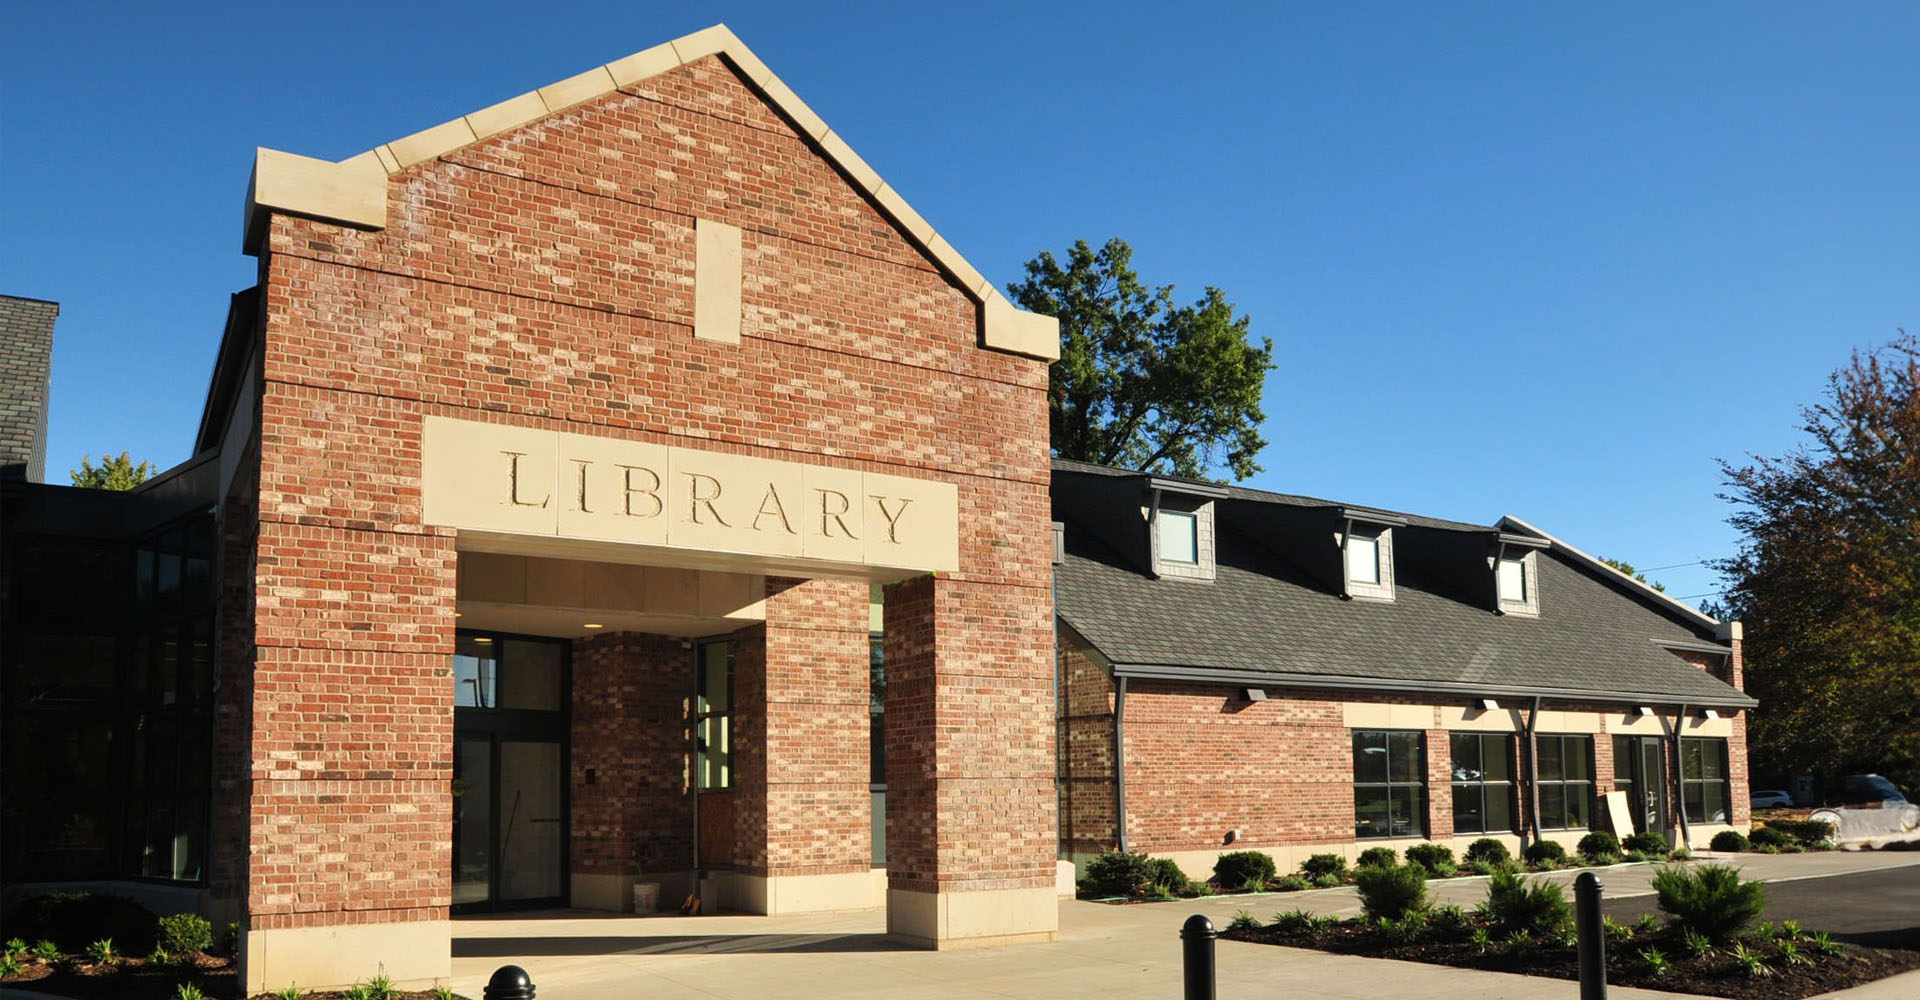 South Euclid Public Library